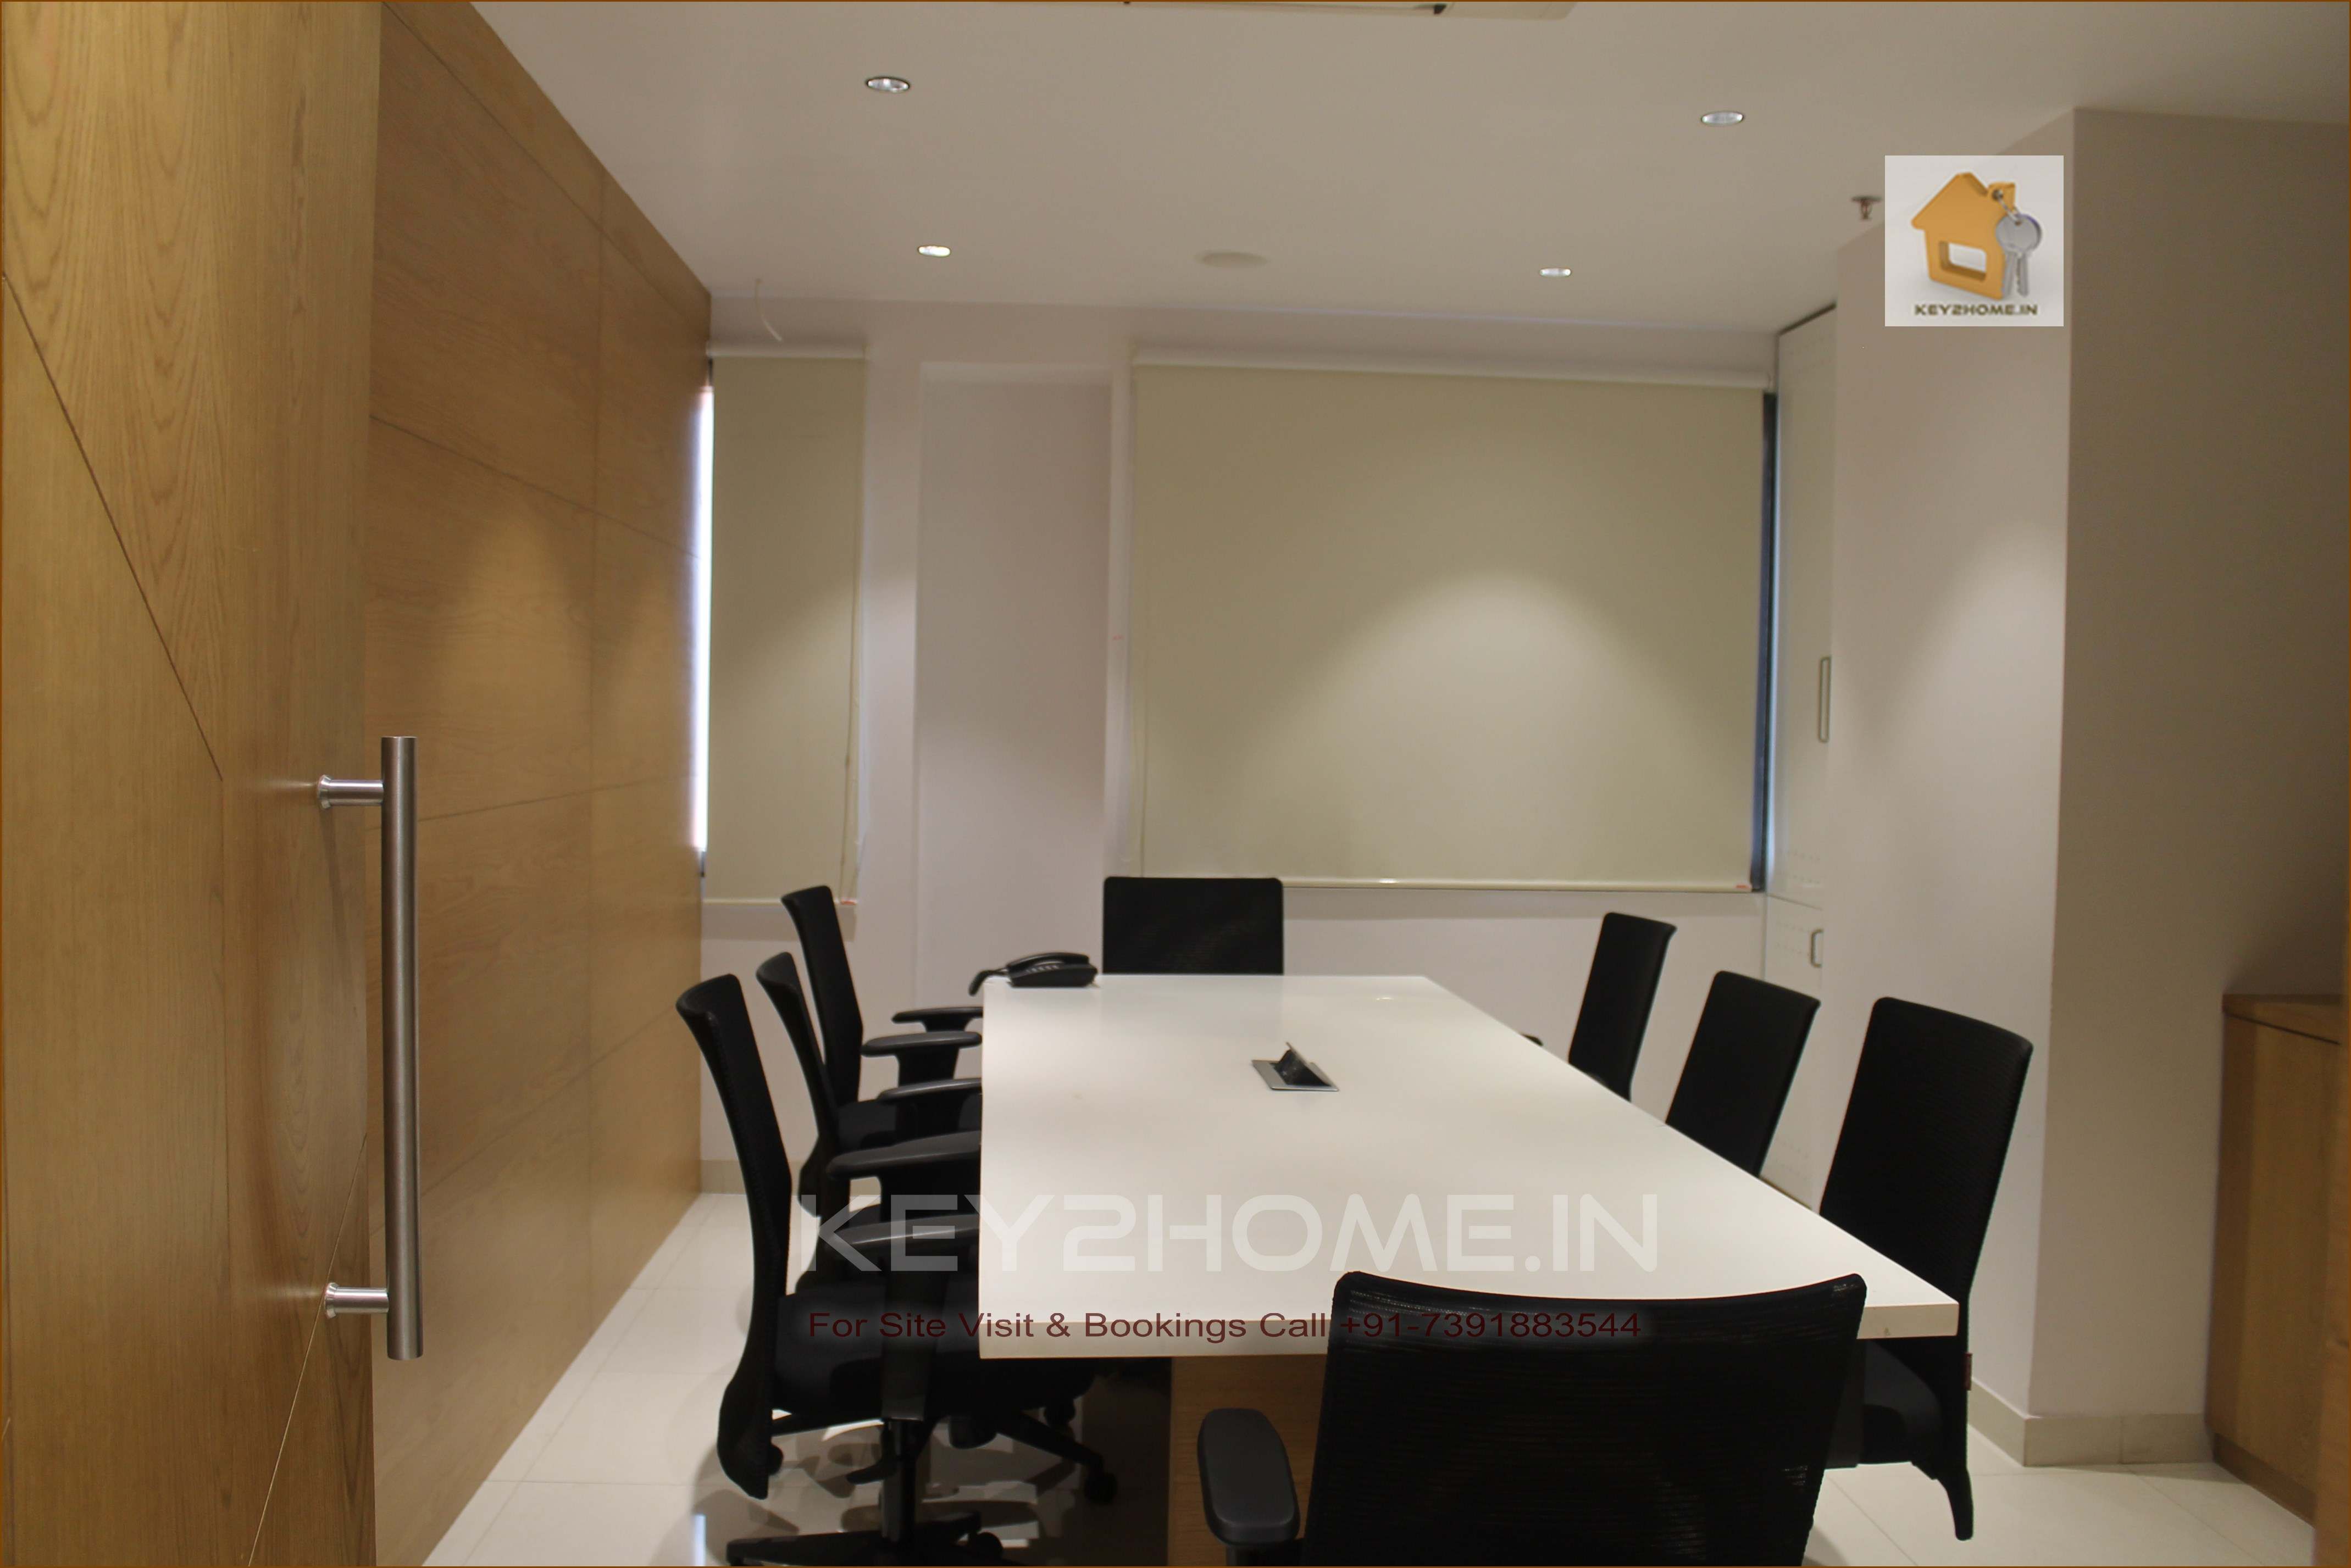 Commercial Office space on rent in Hinjewadi near wakad bridge conference room view 2